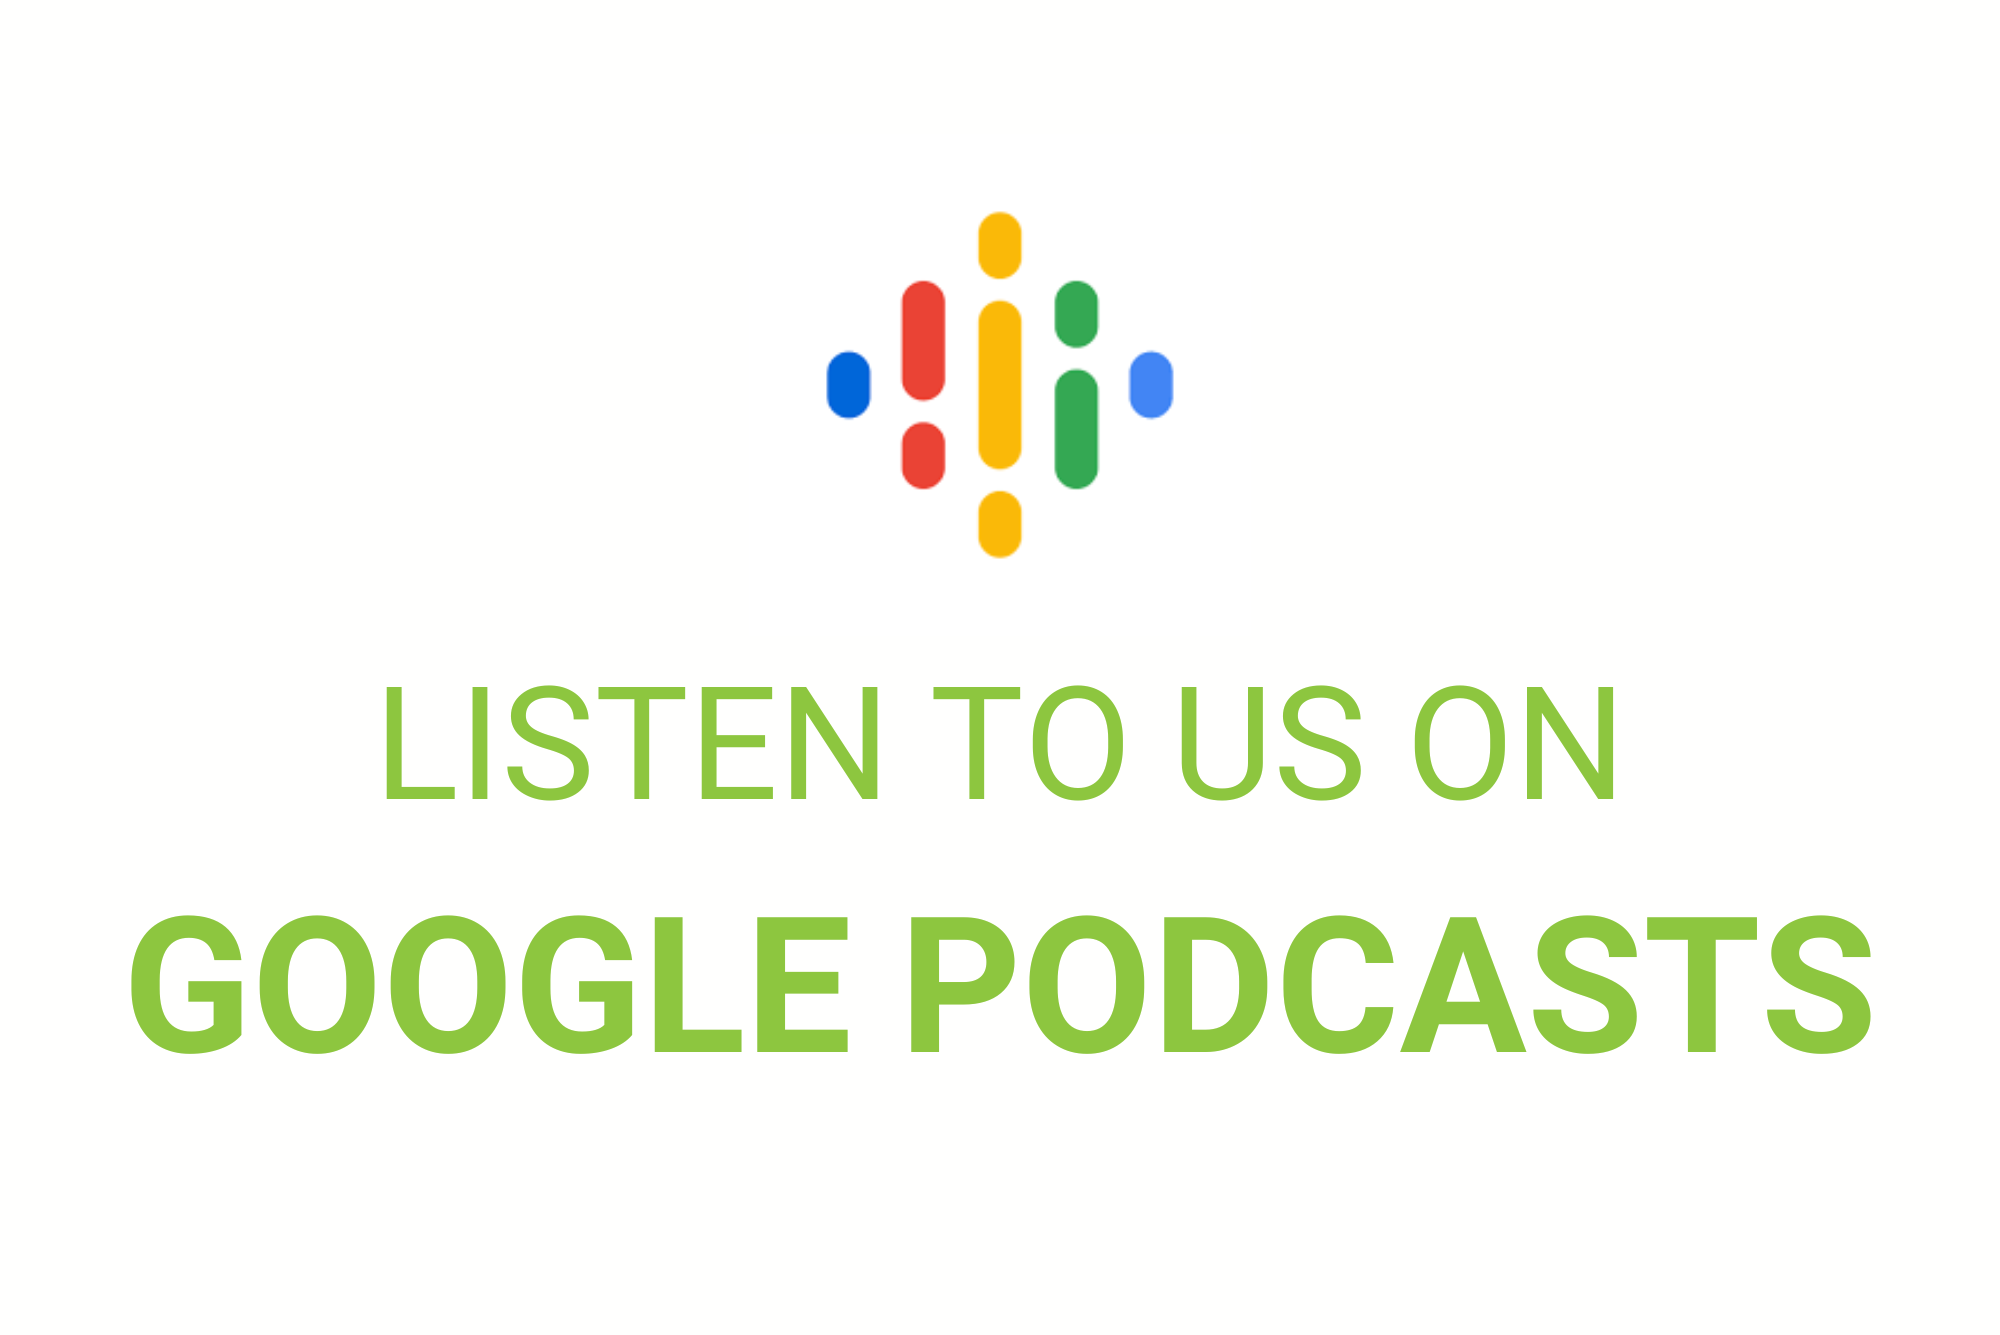 Listen to us on Google Podcasts!